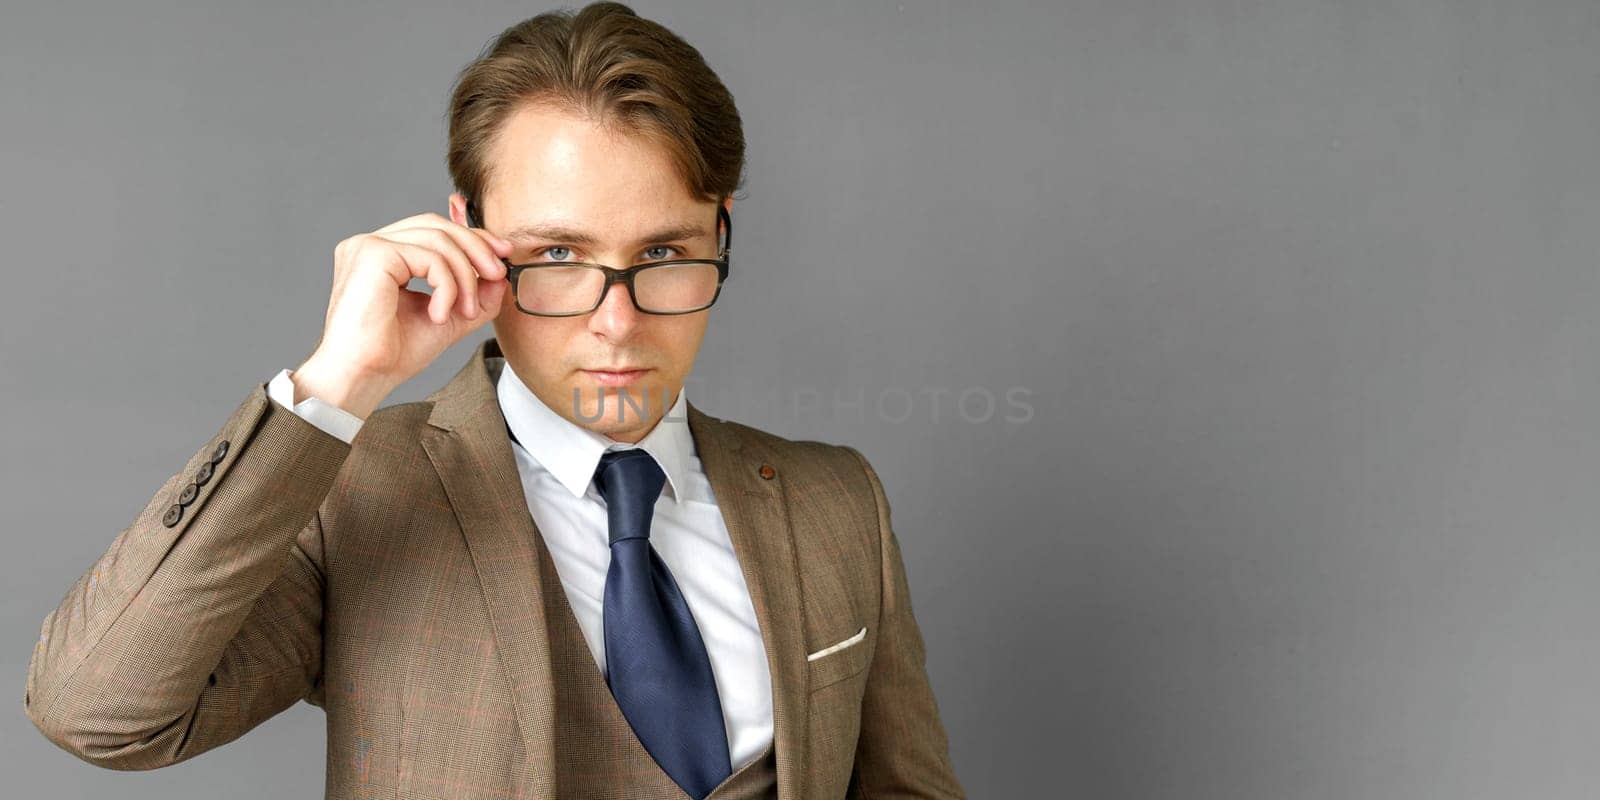 Portrait of a businessman in a suit looking at the camera and adjusting his glasses. Gray background. Business and finance concept